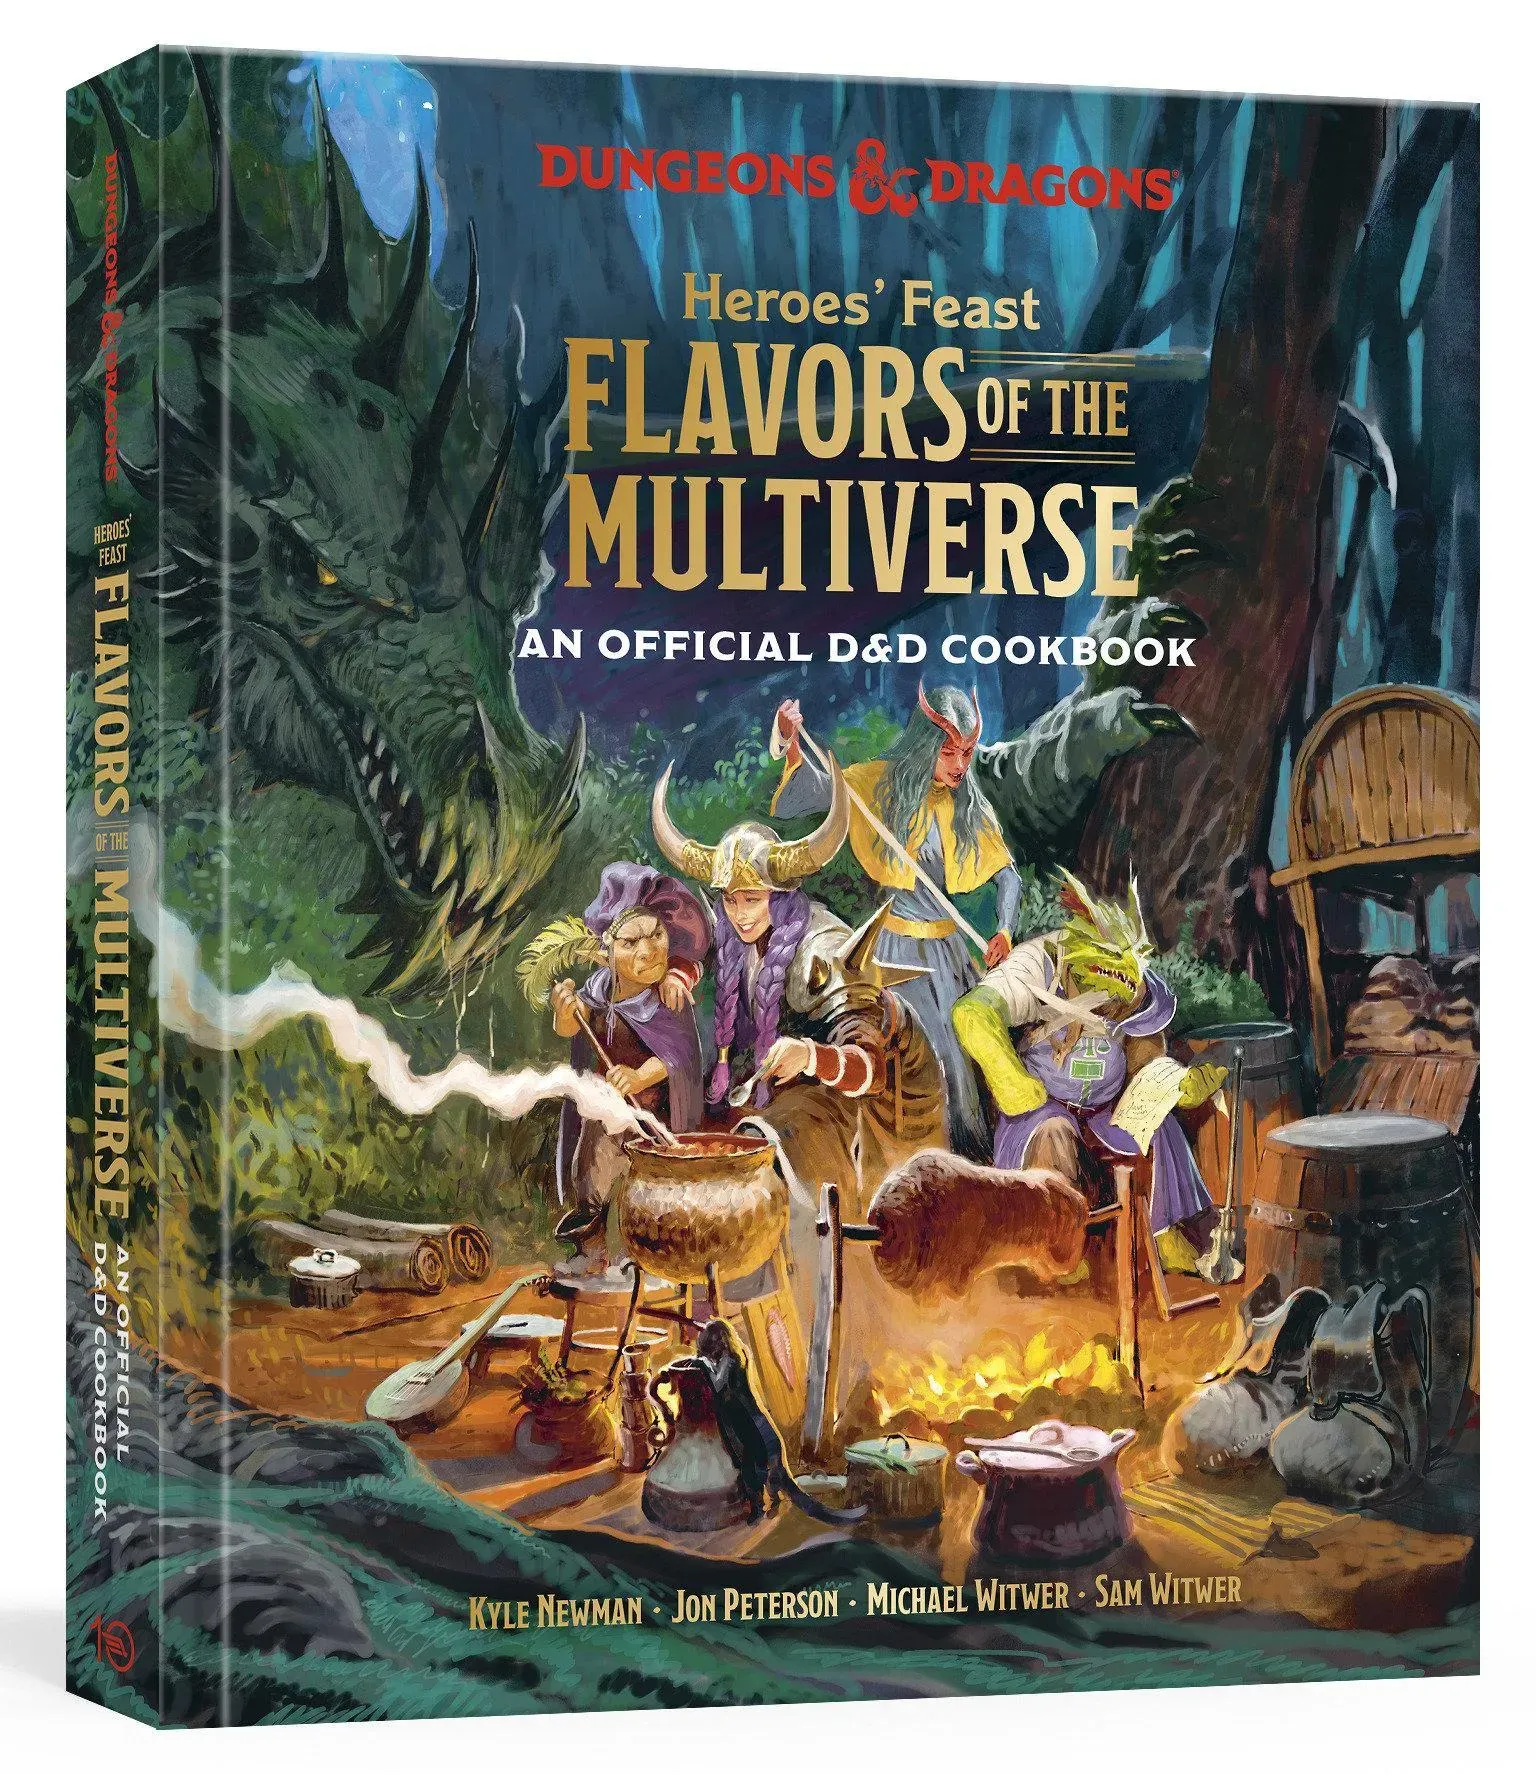 Heroes' Feast Flavors Of The Multiverse - Kyle Newman  Jon Peterson  Michael Witwer  Sam Witwer  Official Dungeons & Dragons Licensed  Gebunden